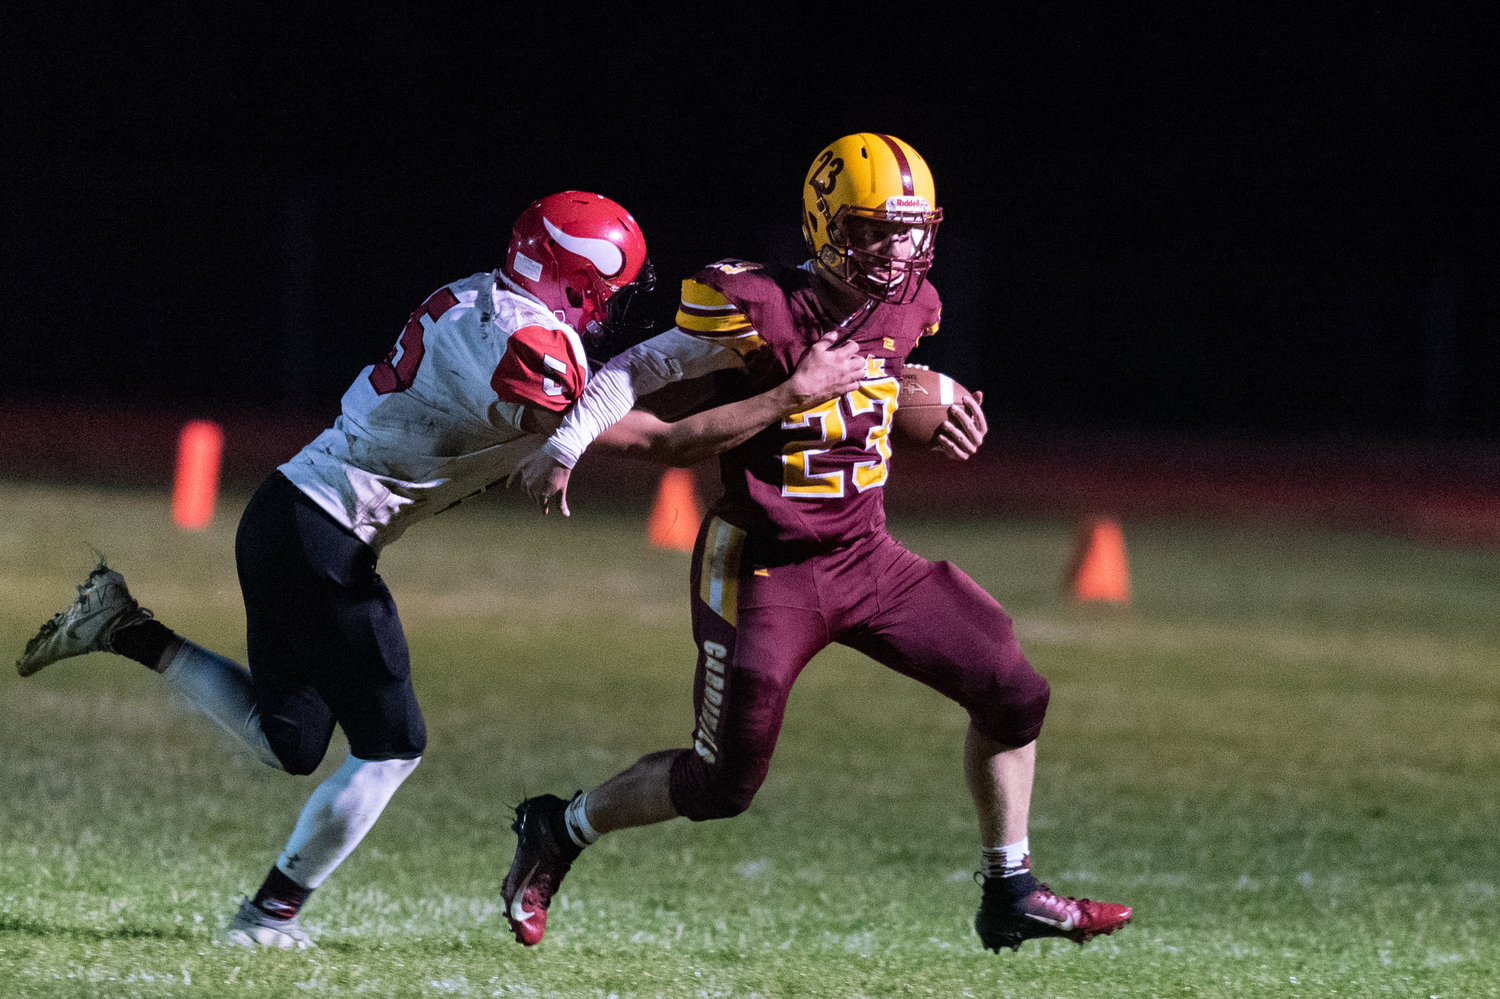 Winlock quarterback Neal Patching powers through a tackle in the Cardinals win over Mossyrock Oct. 8.